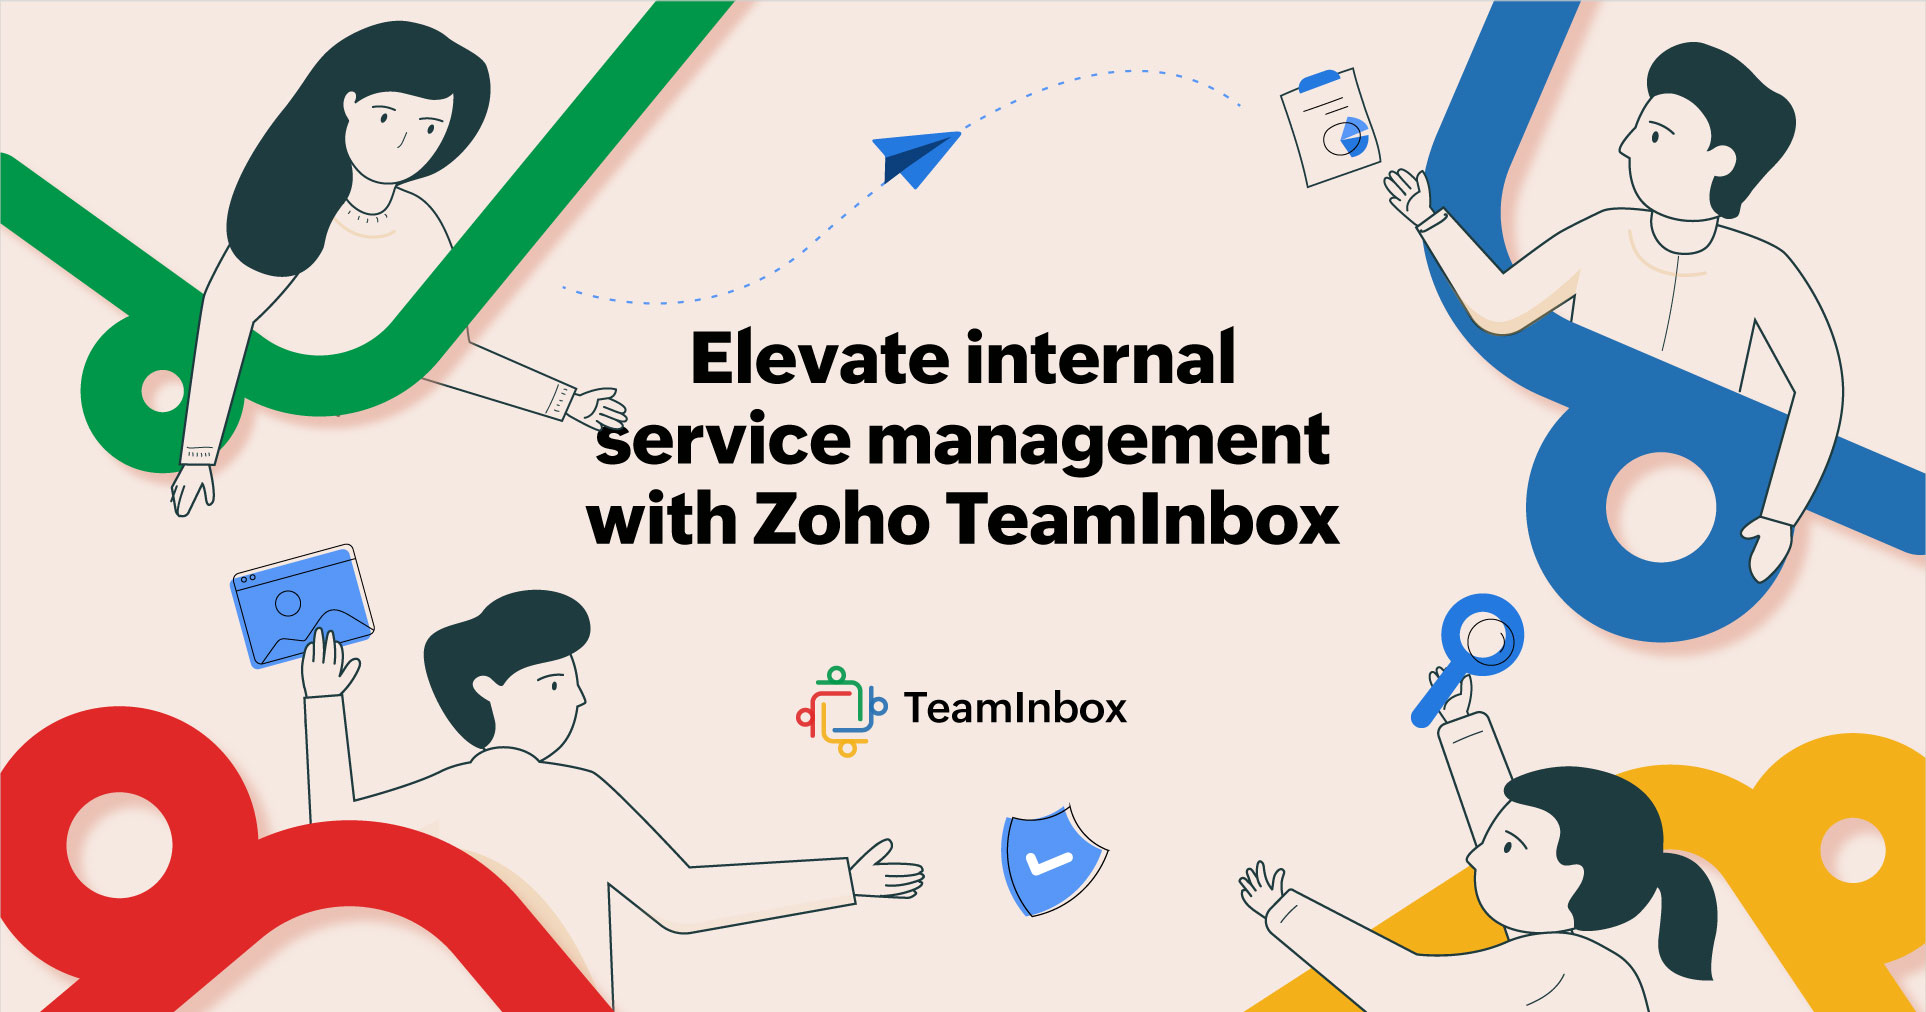 Elevate internal service management with Zoho TeamInbox